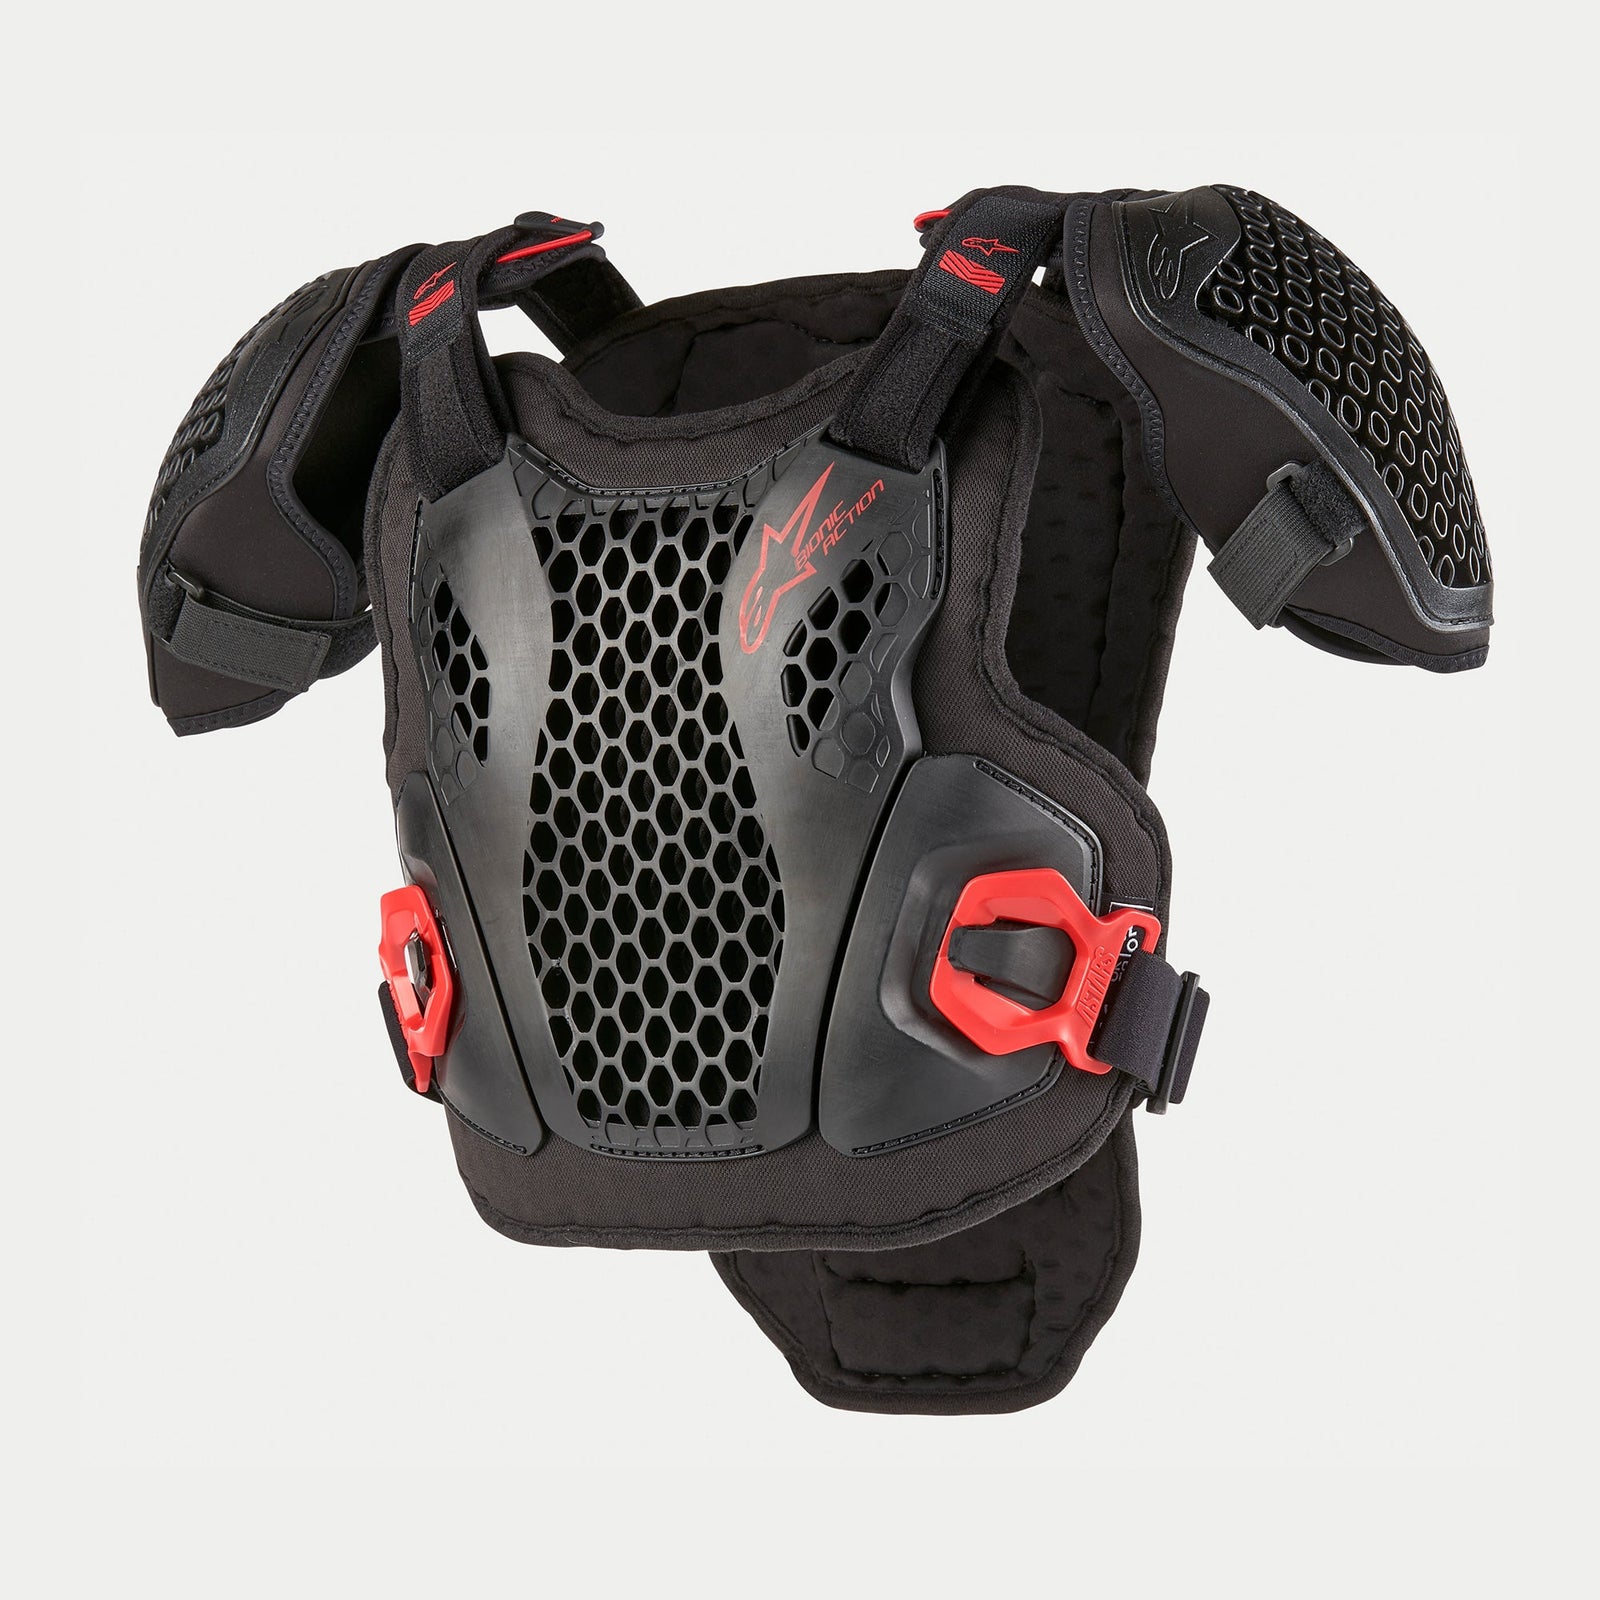 Bionic Action Chest Protector - Jugendliche